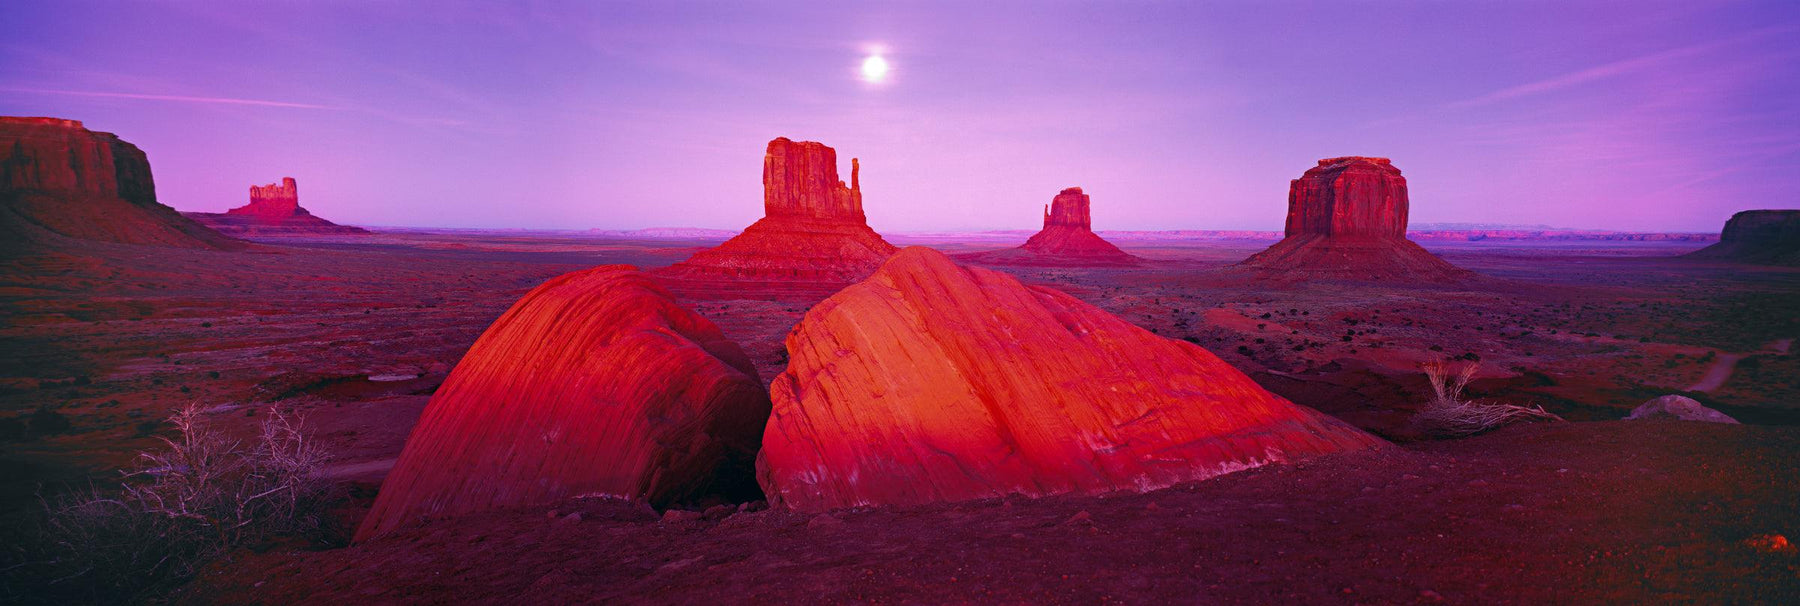 Giant sandstone formations and buttes of Monument Valley Utah during a pink sunset